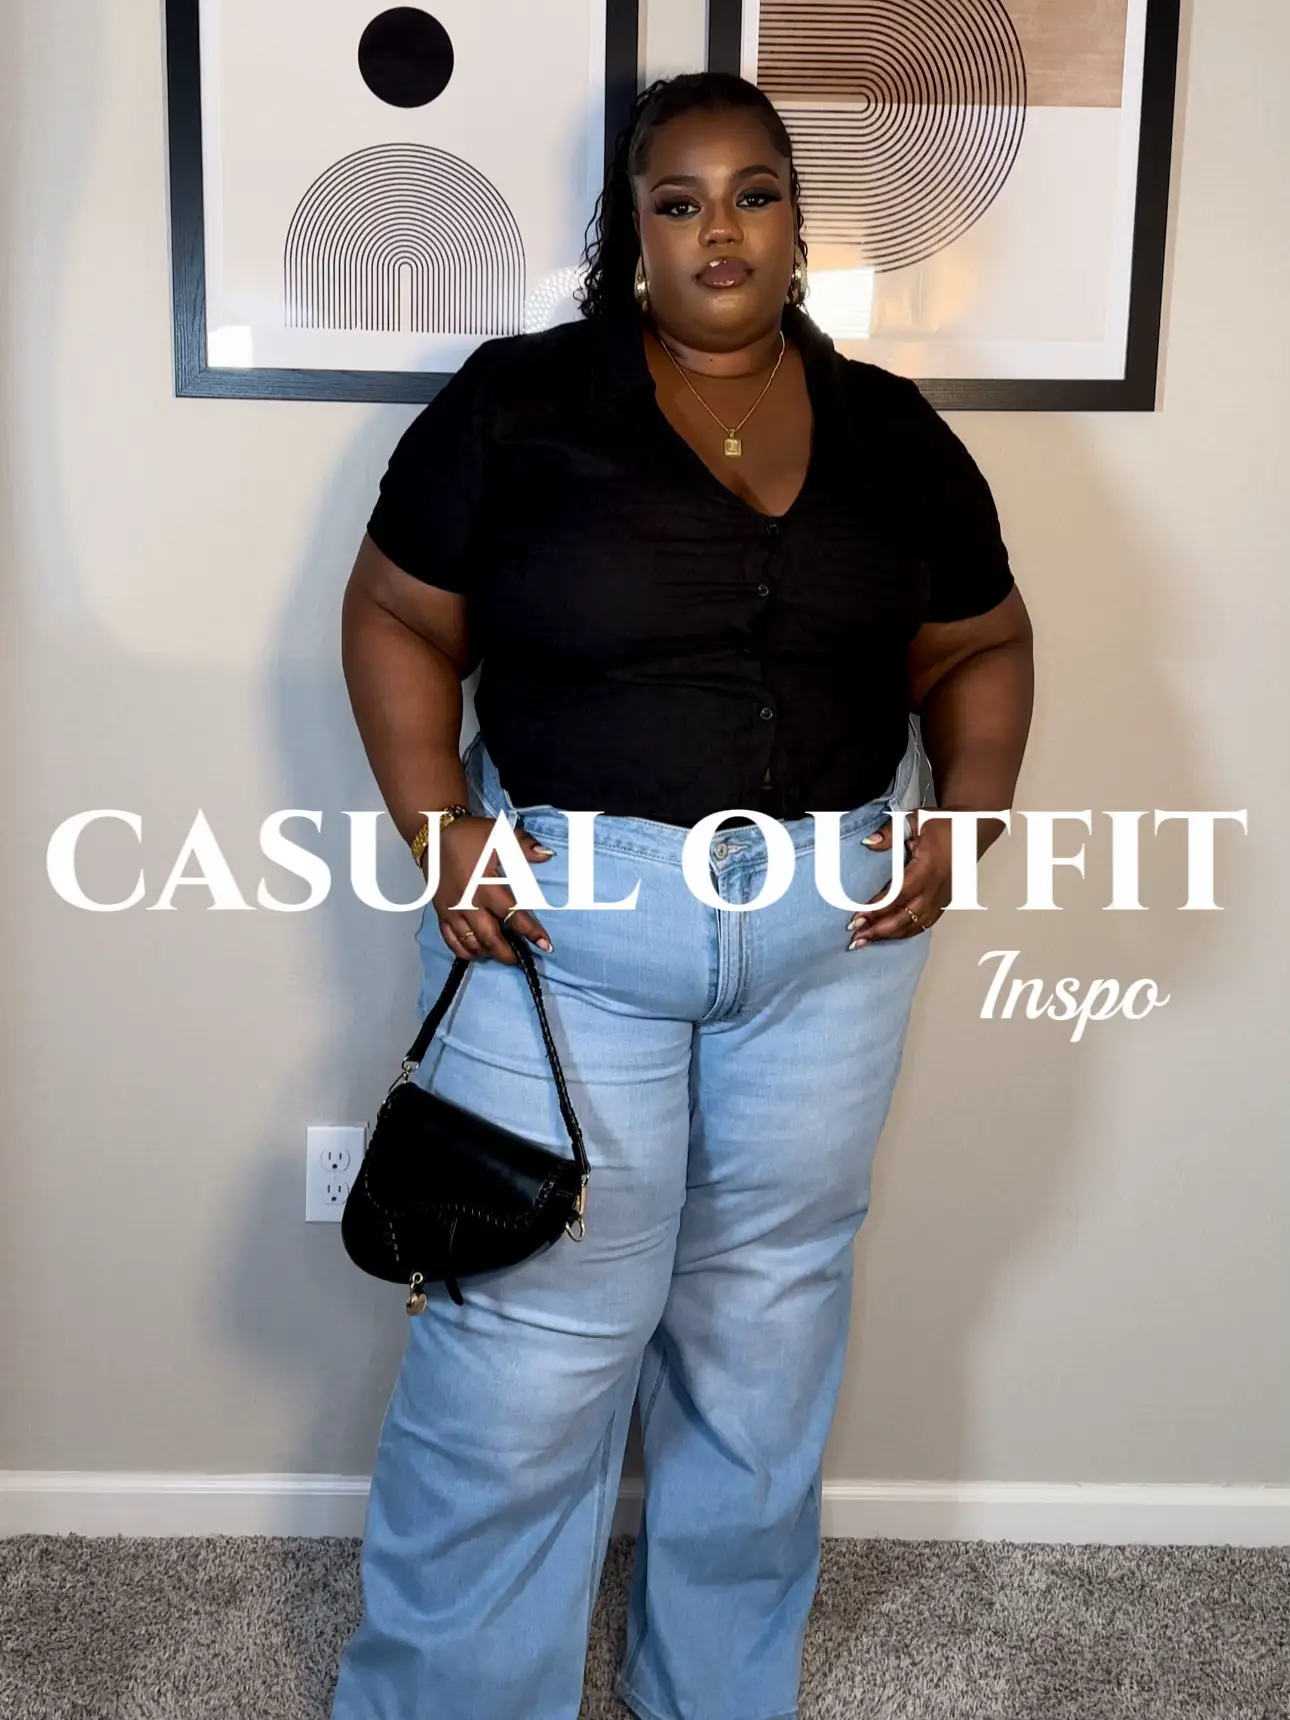 Casual Outfit Inspo, Gallery posted by Brianna